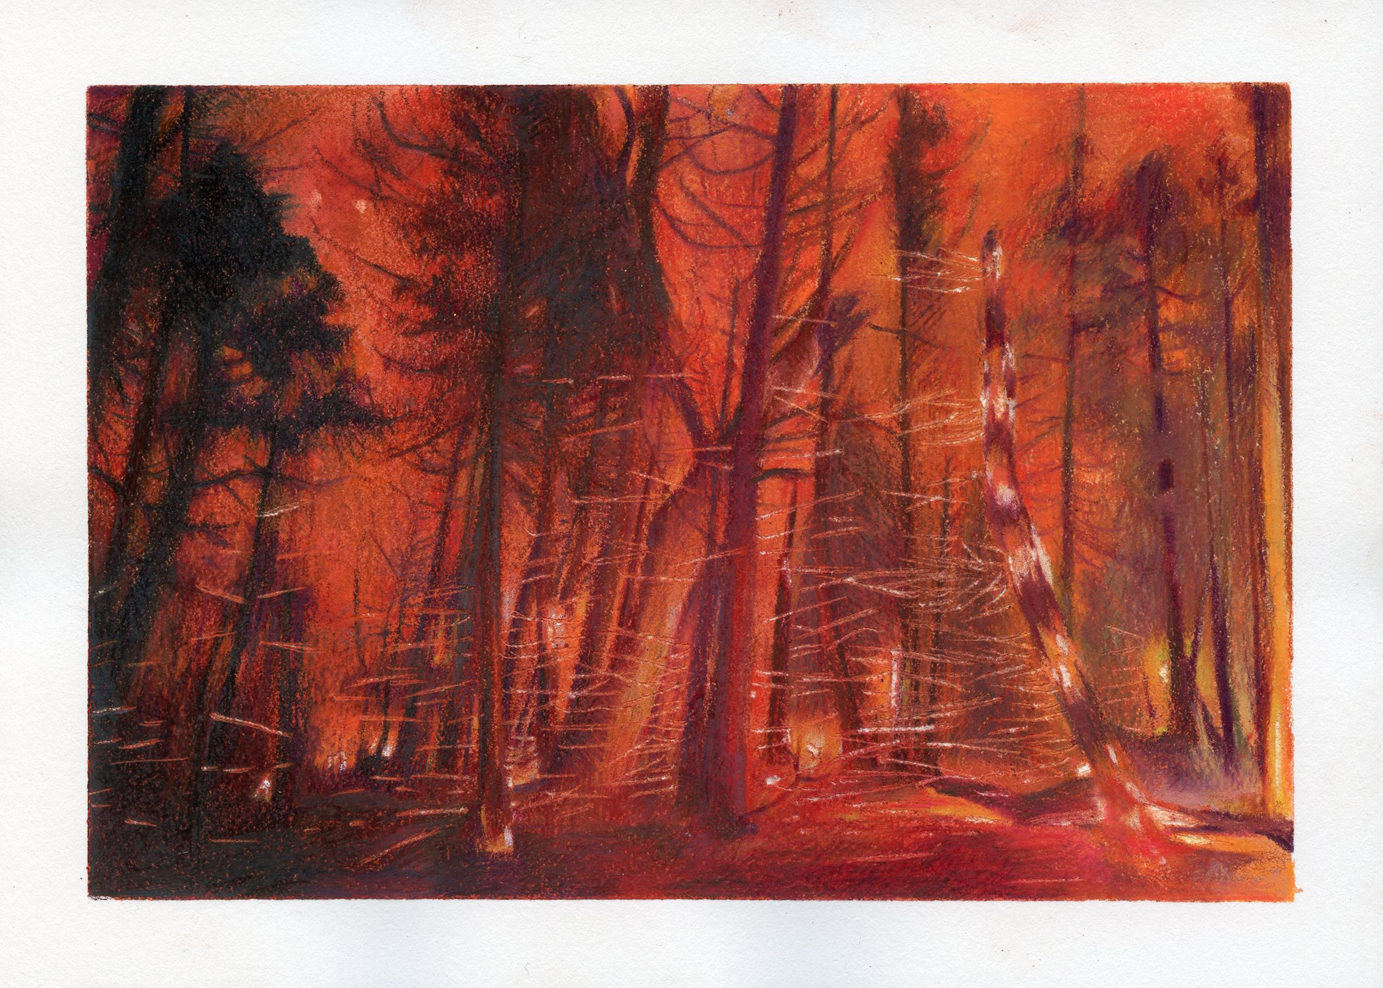 Samantha Scherer, Wildfire, 2021, colored pencil on paper, 5 x 7 inches $550.